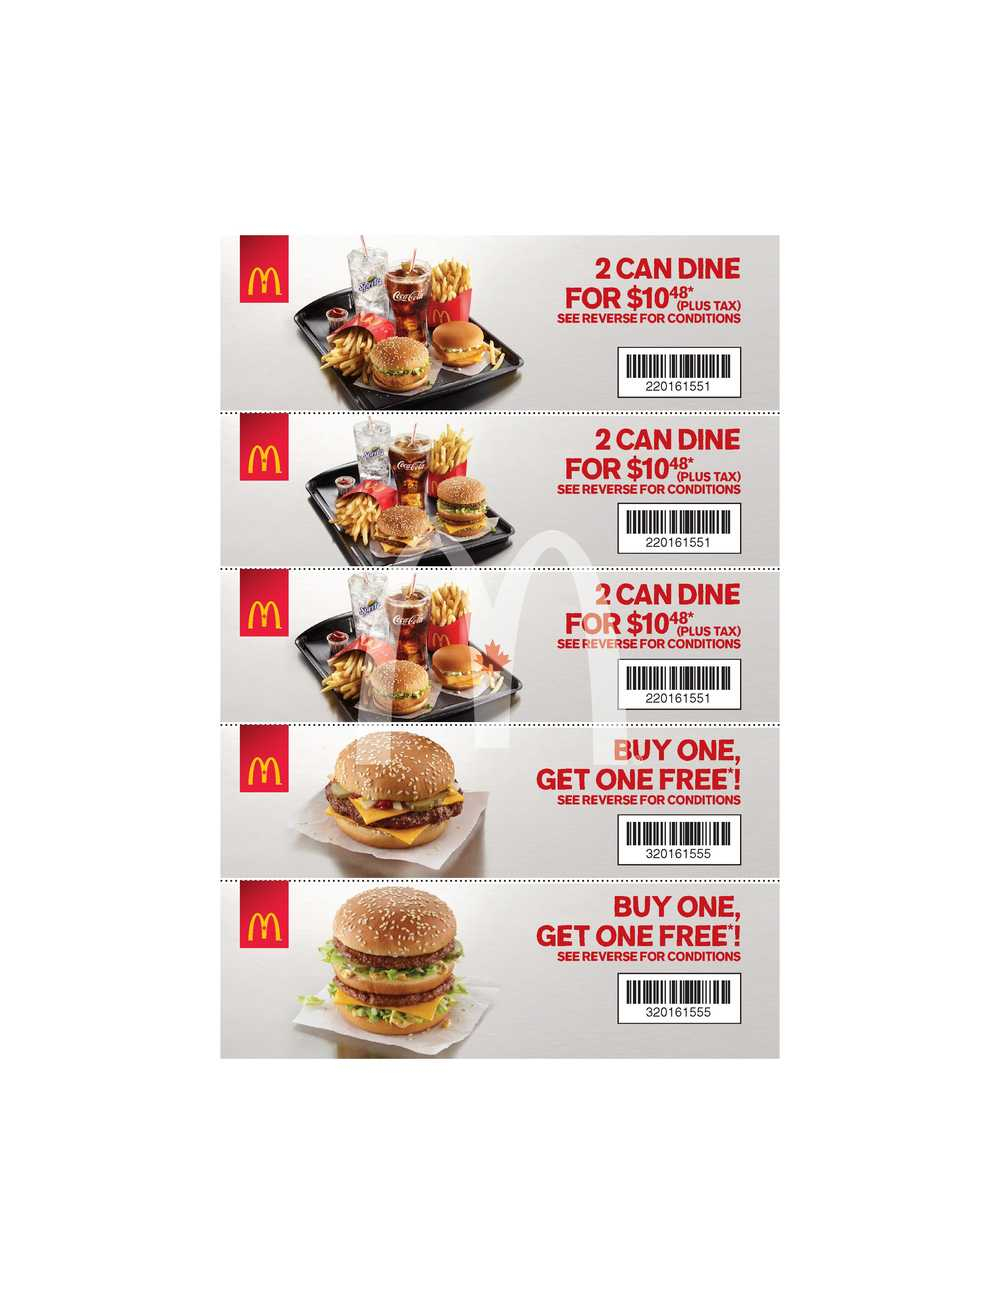 Mobile-New-Mcdonalds Printable Coupons – Printable Coupon Codes Online - Free Printable Mcdonalds Coupons Online